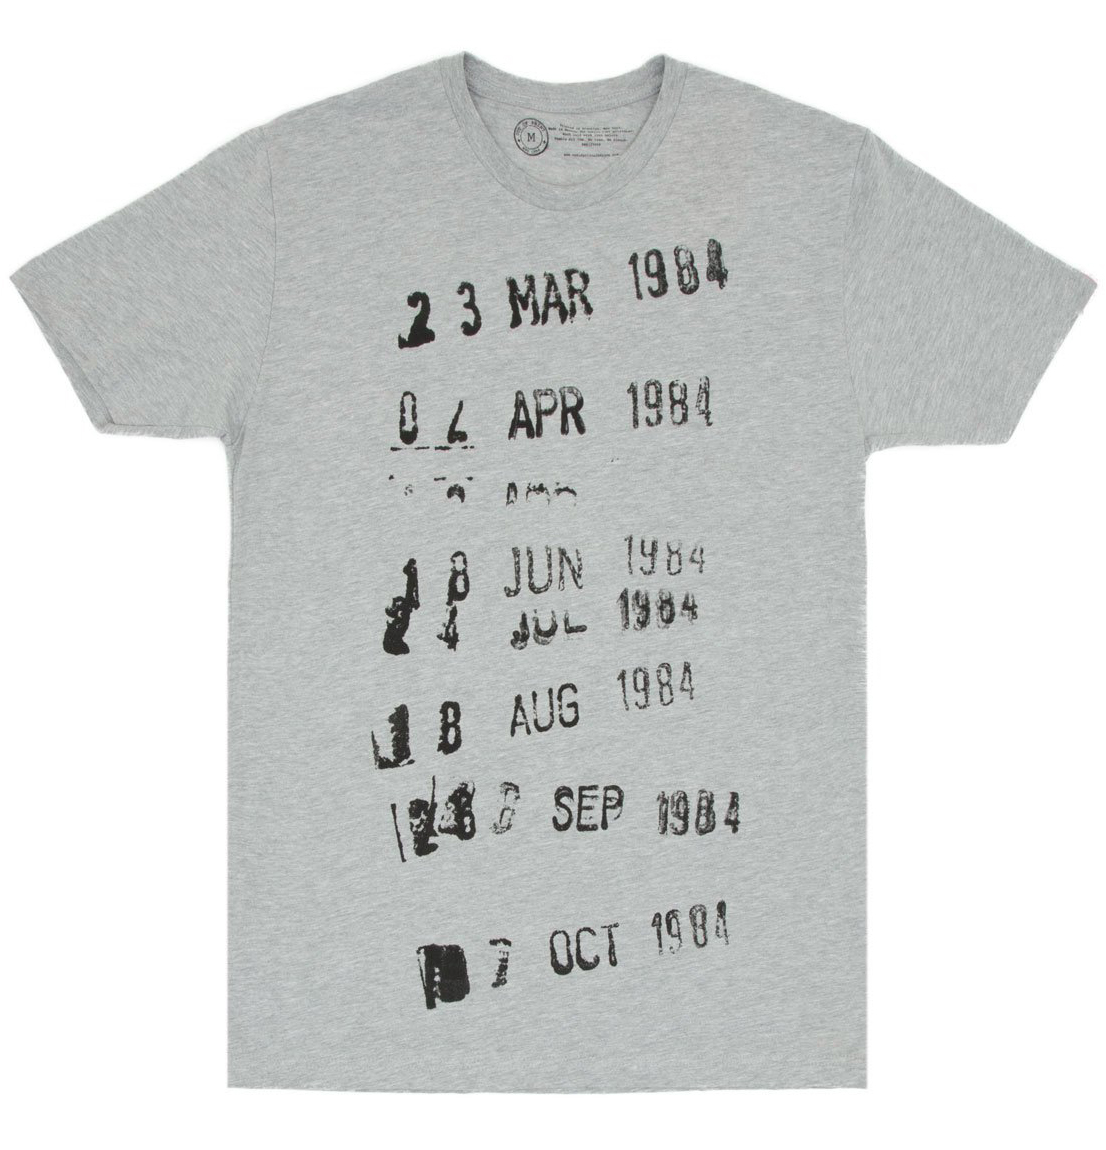 gray tshirt with retro library stamps design